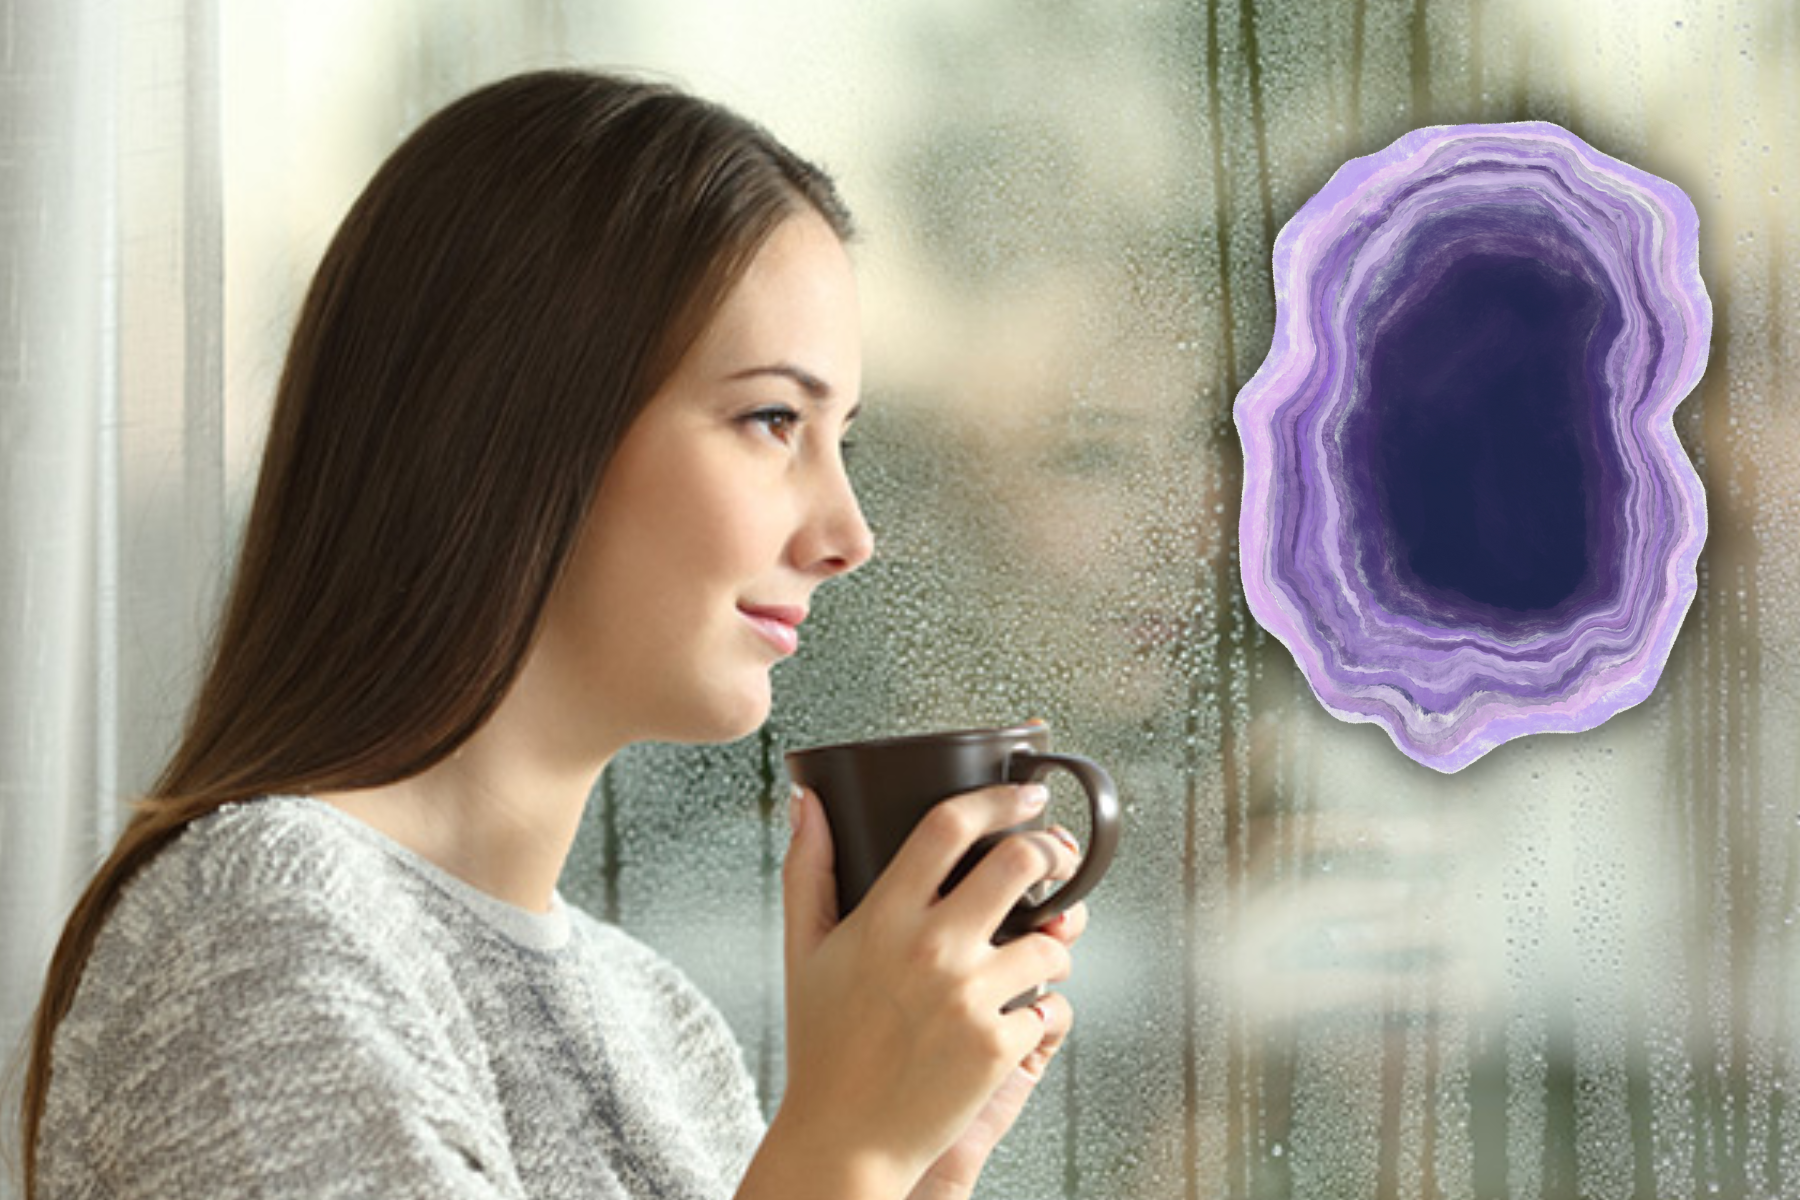 A view of a woman sitting in front of a window, holding a cup of coffee and with an amethyst stone nearby.